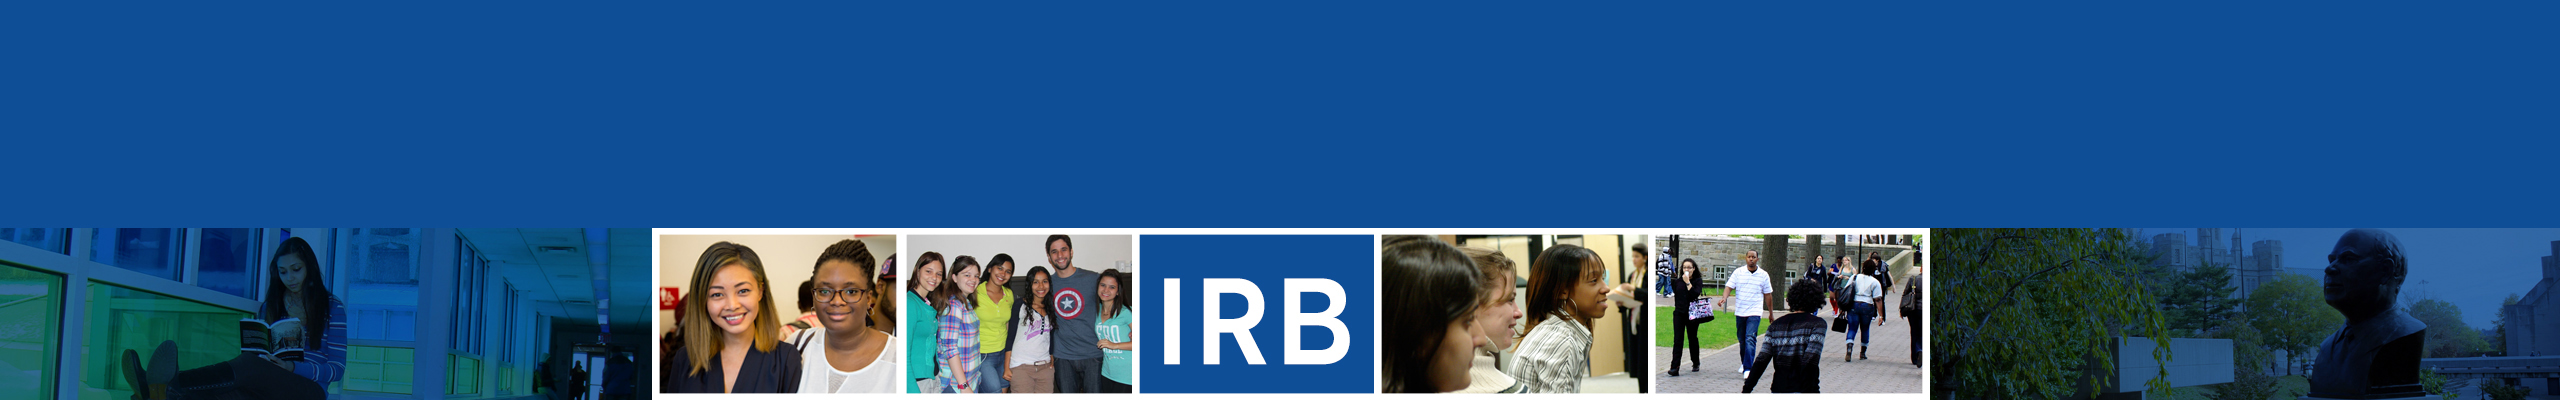 Institutional Review Board (IRB)